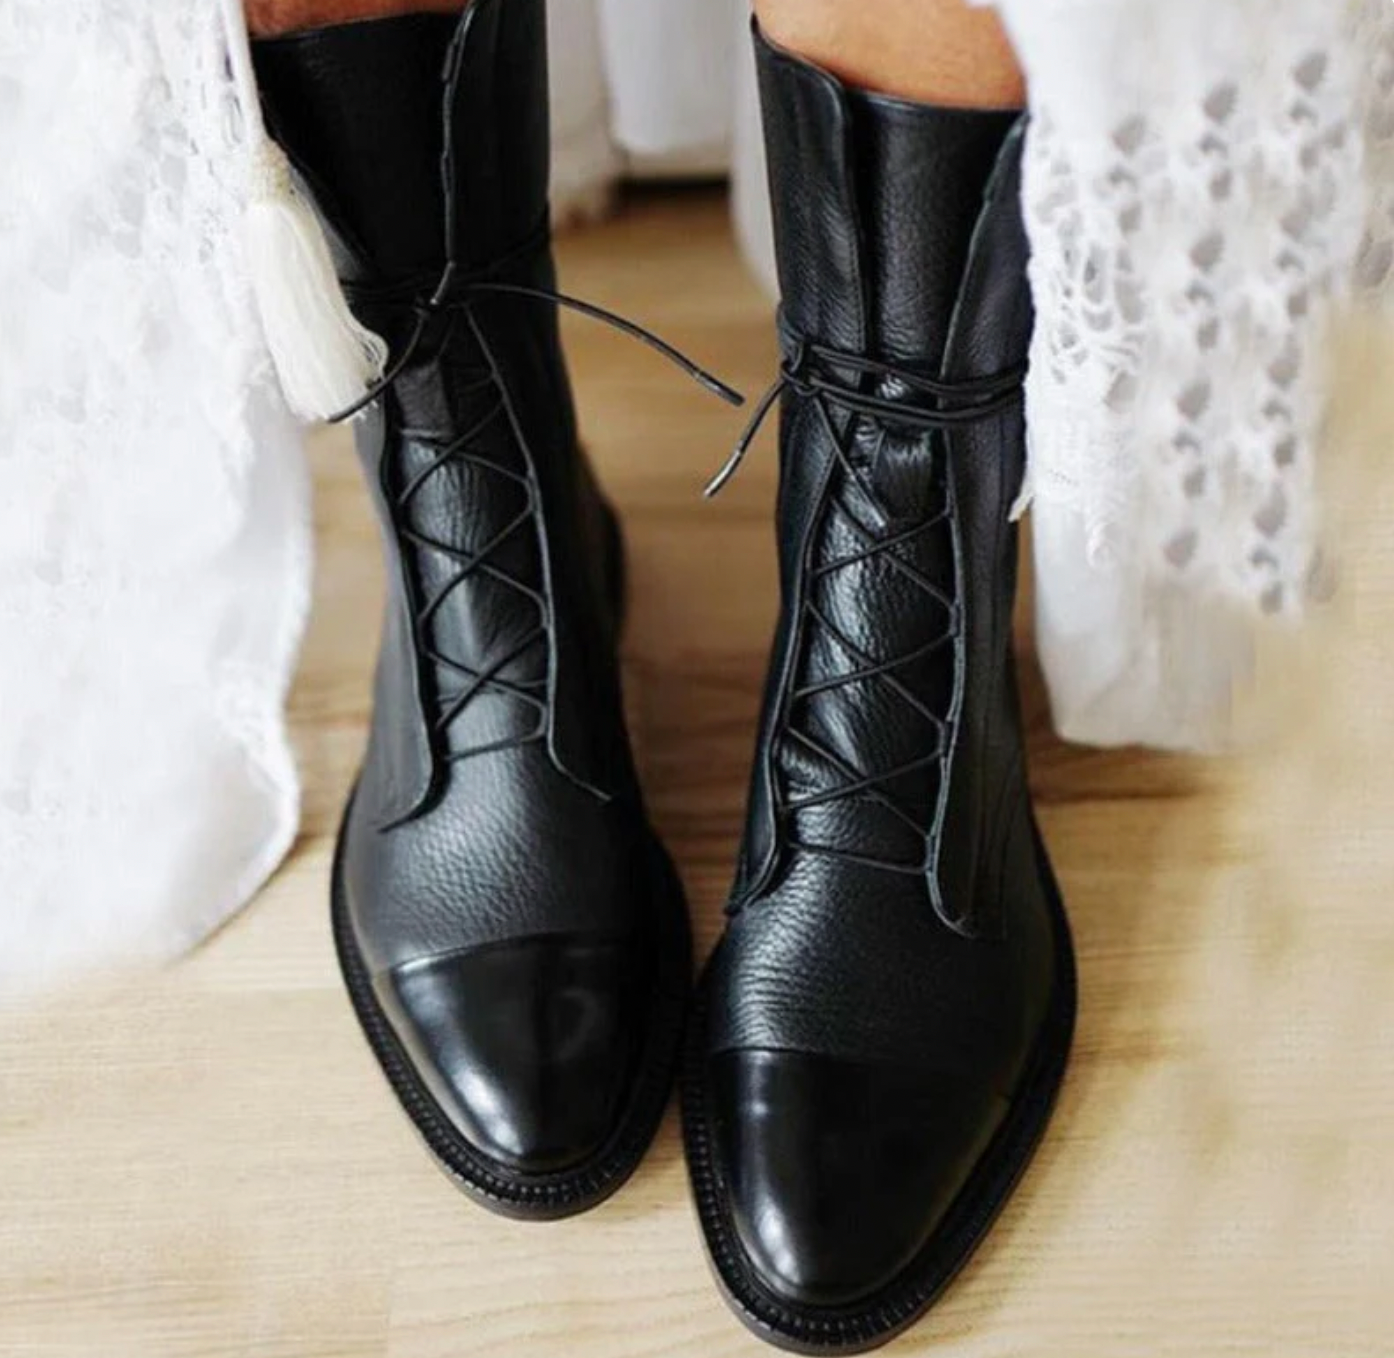 ANABEL - The elegant and cozy boot